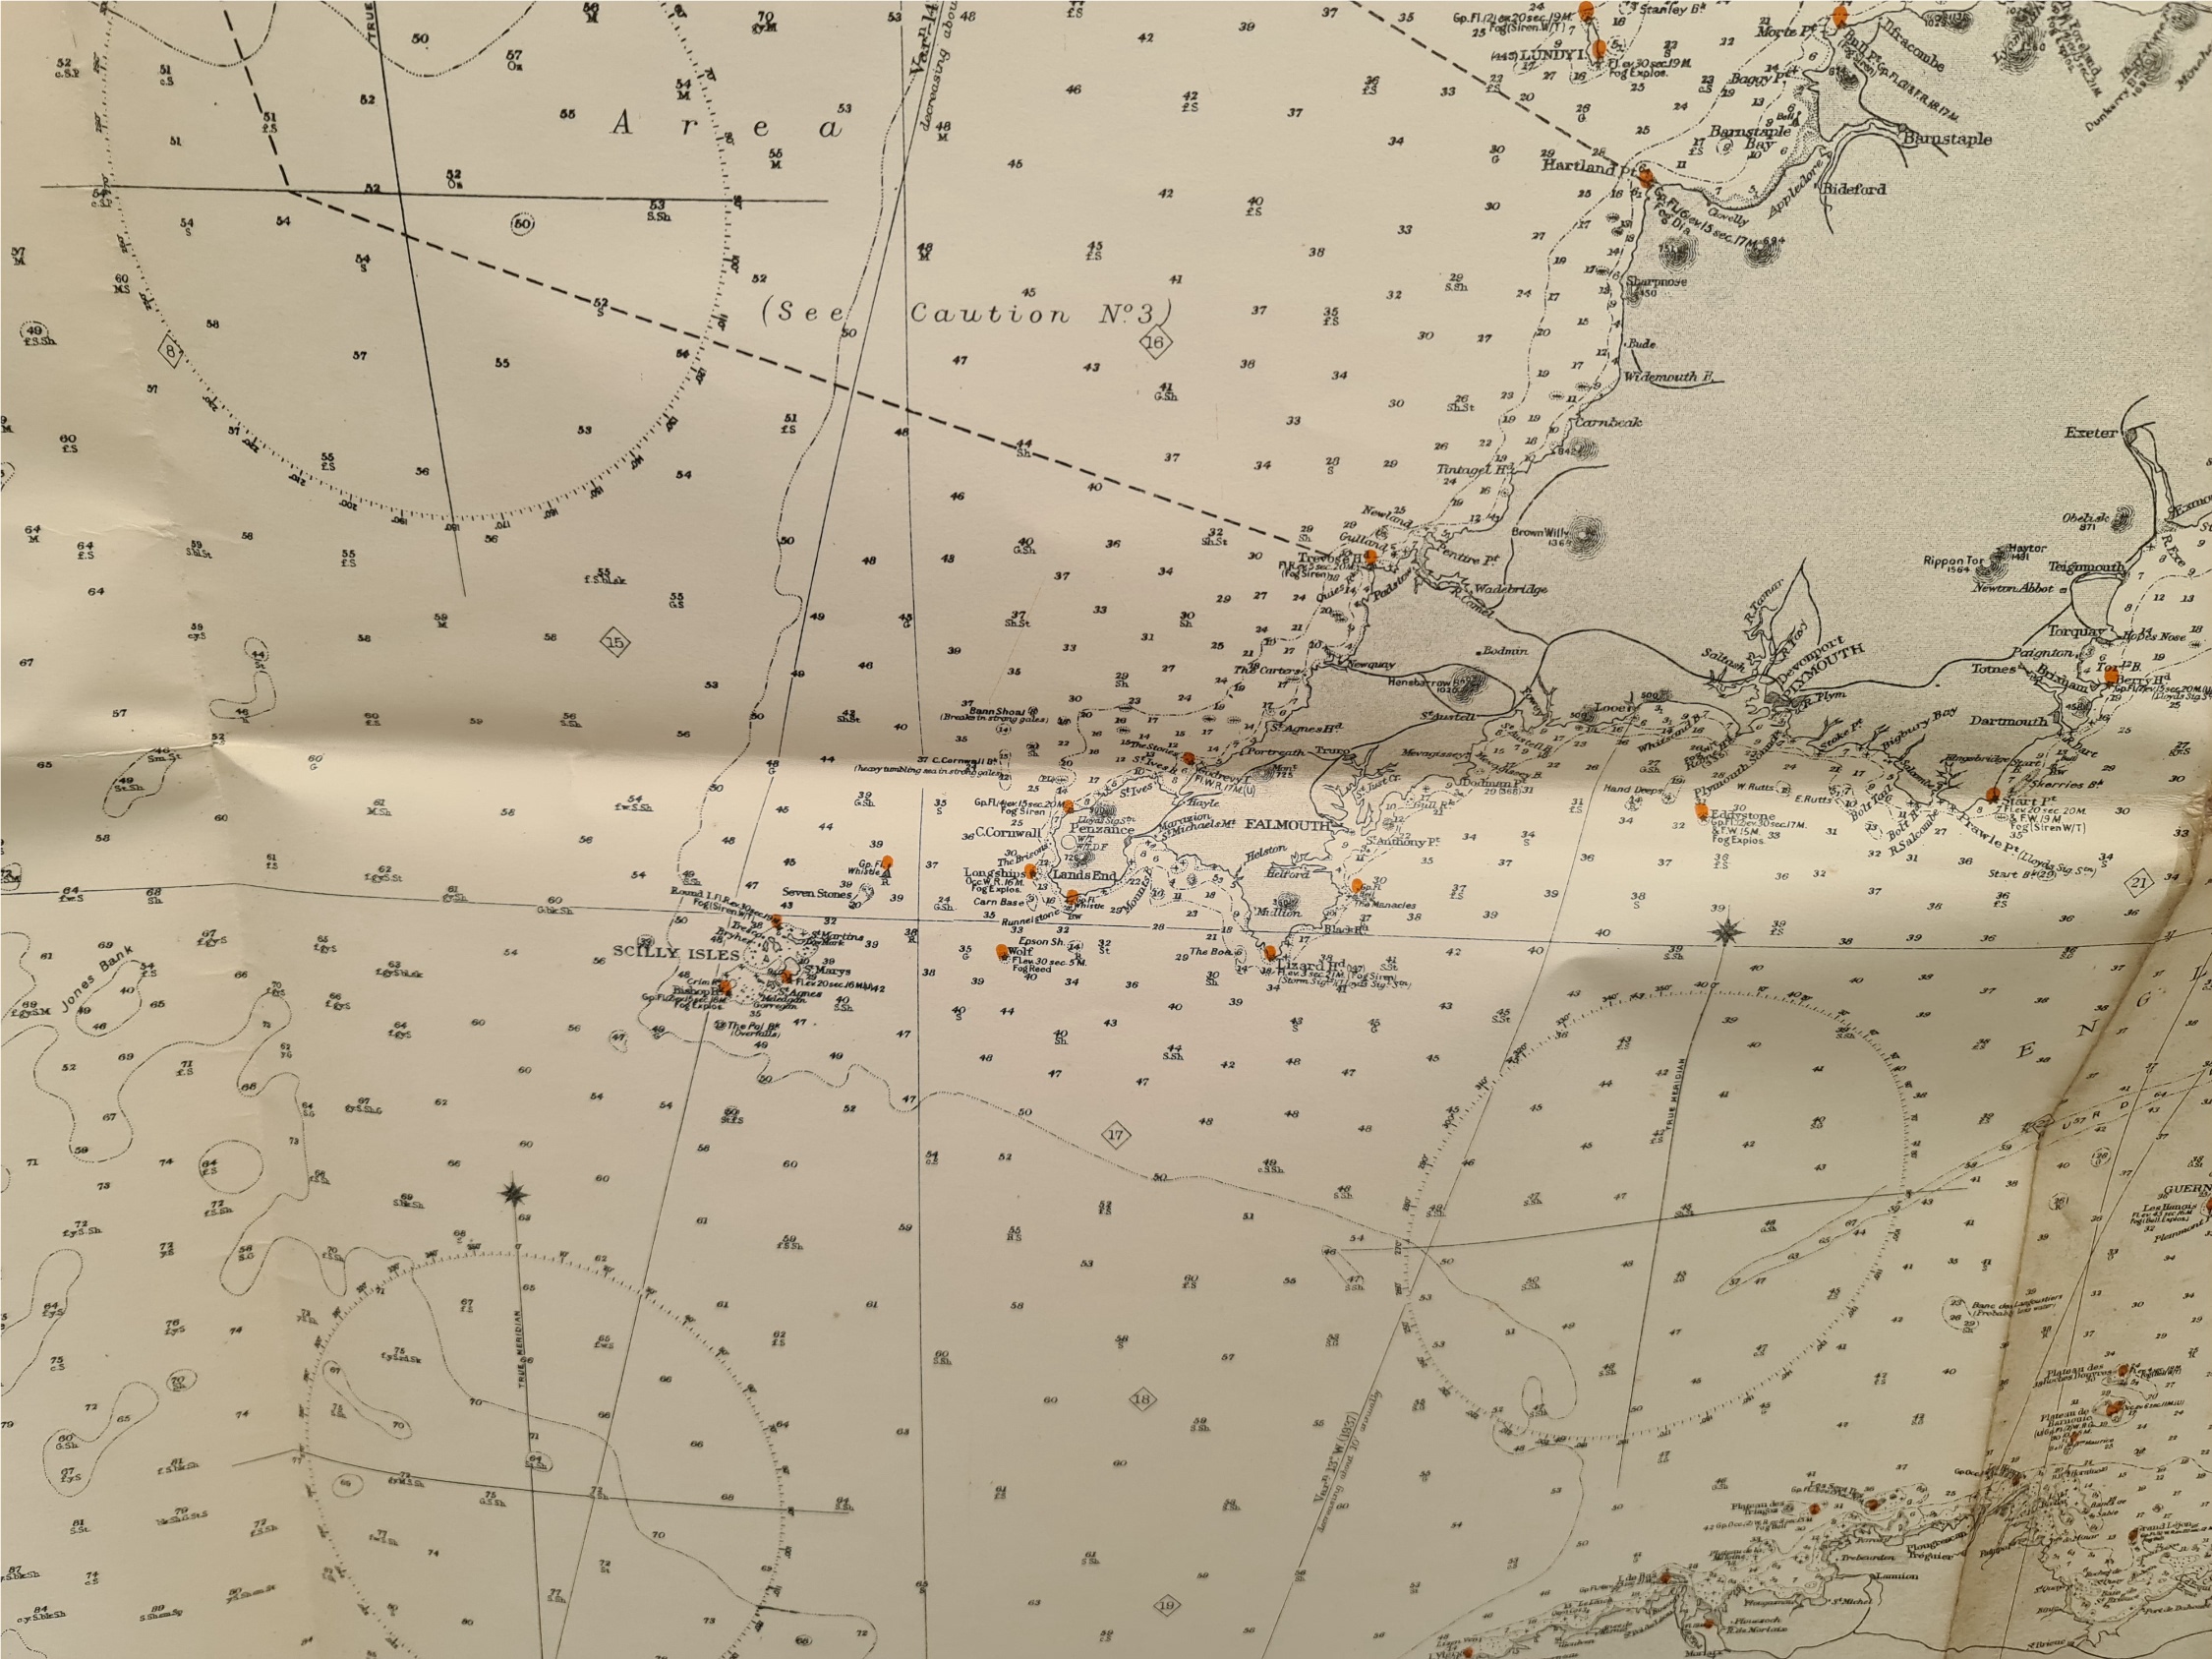 WWII Military British Naval English Channel & Western Approaches Map - Image 3 of 6